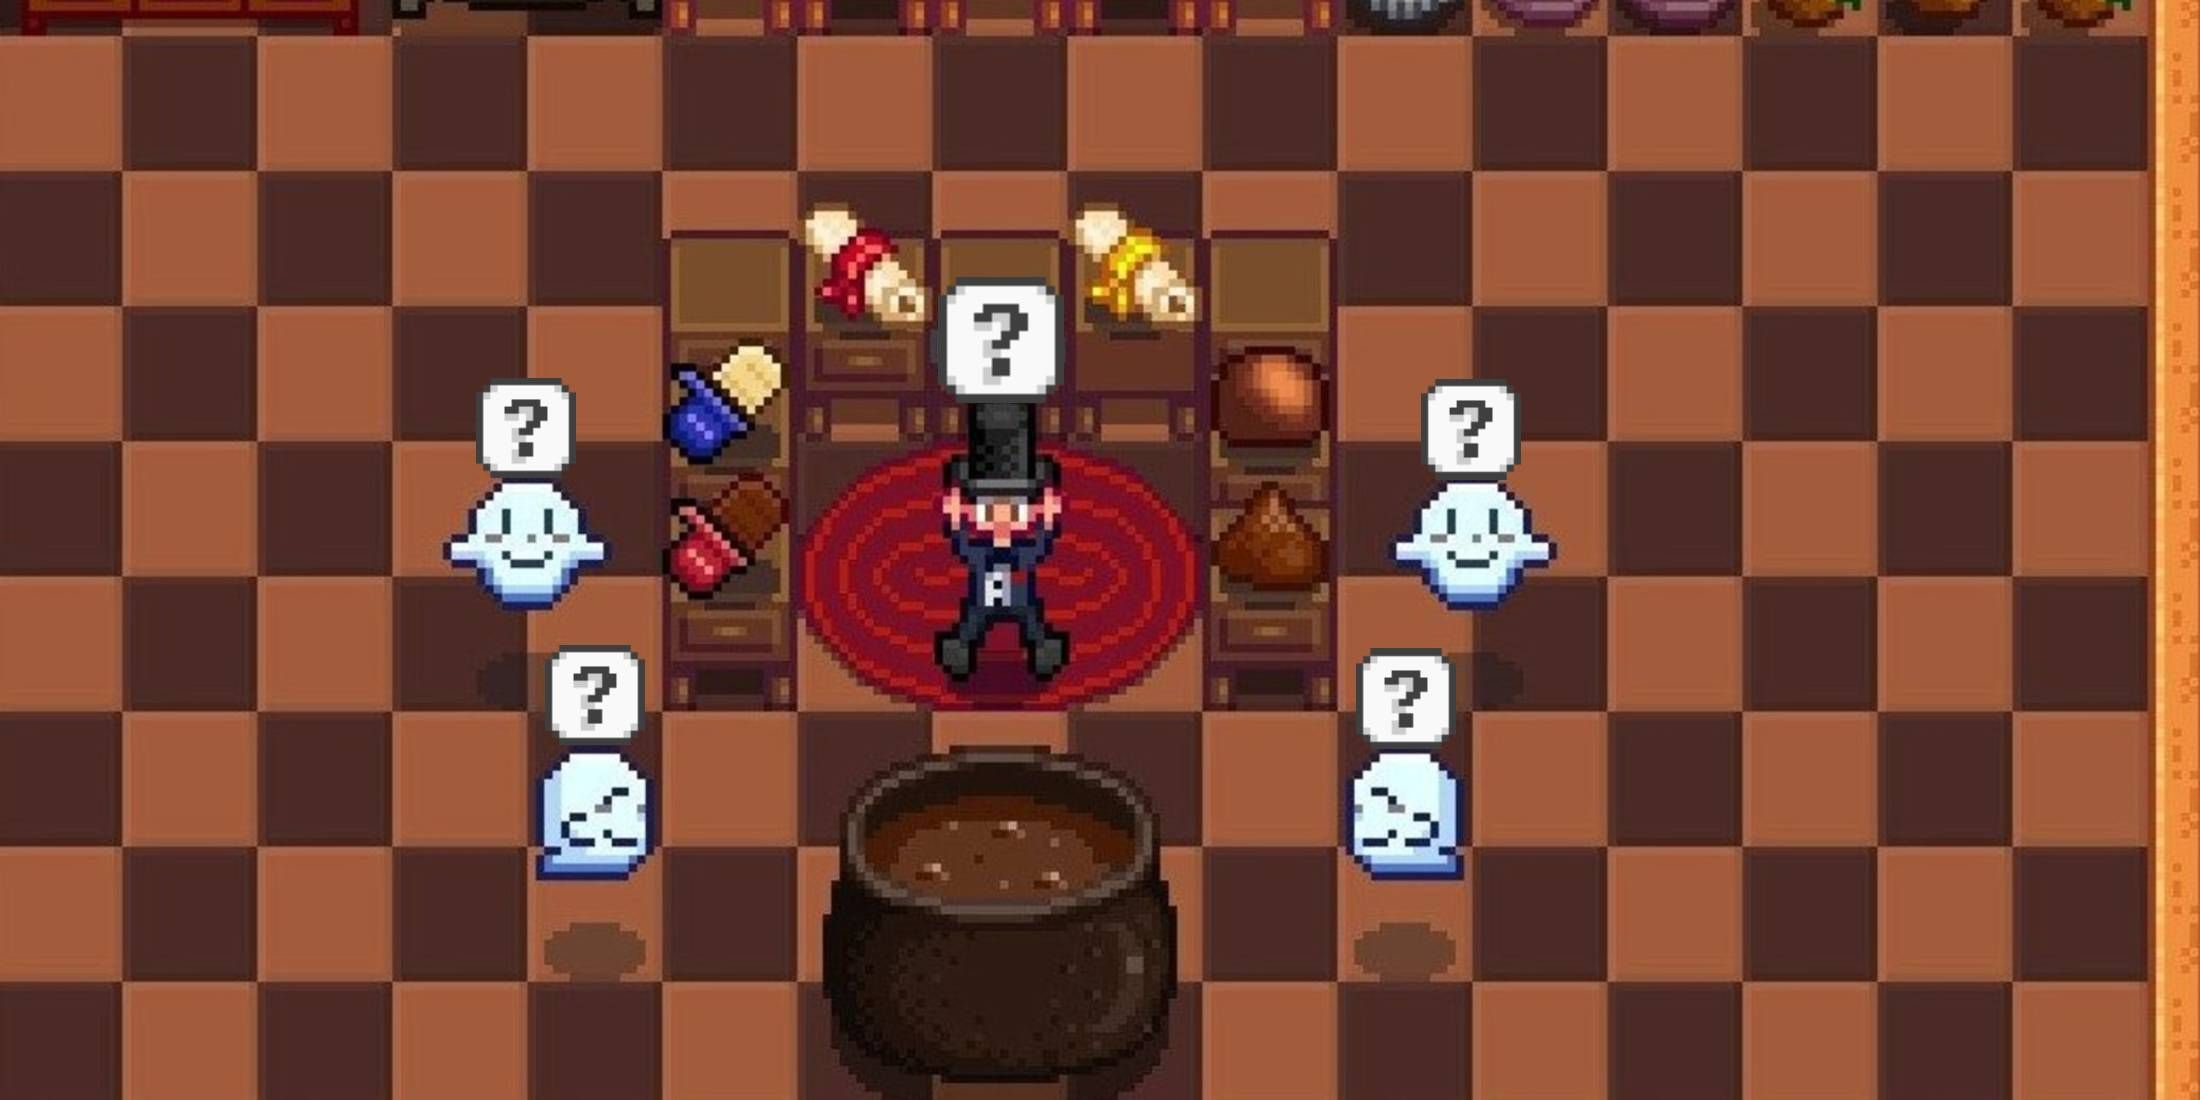 Player character and ghosts from Haunted Chocolatier with question emotes from Stardew Valley